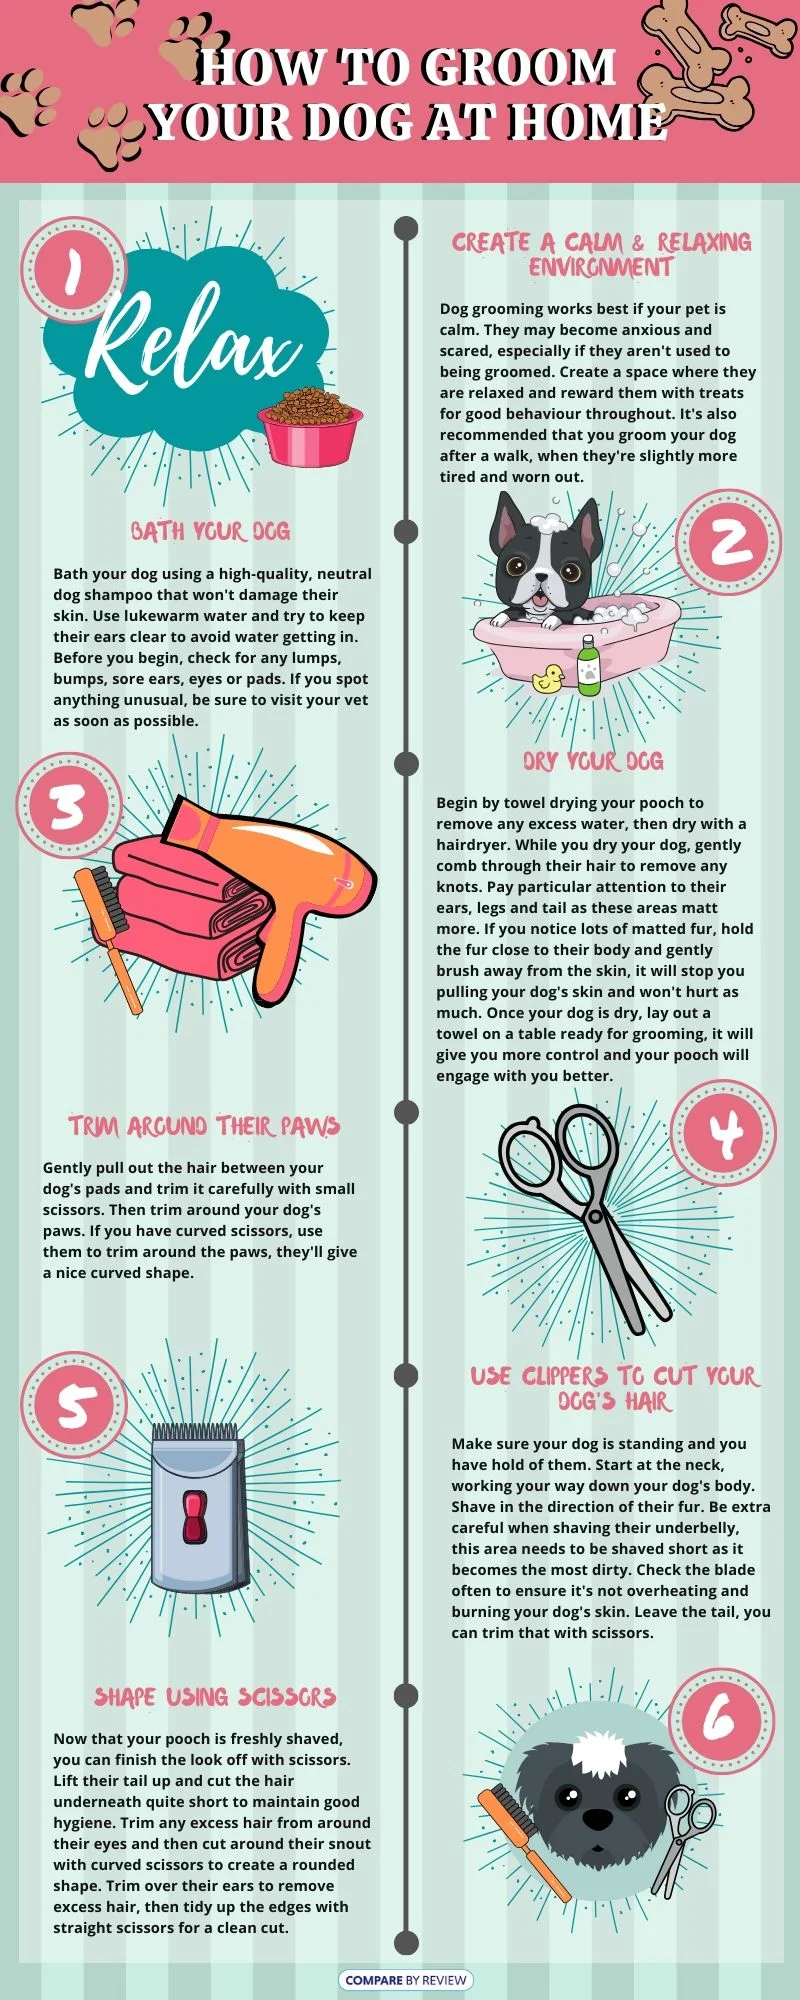 how often should your dog be groomed